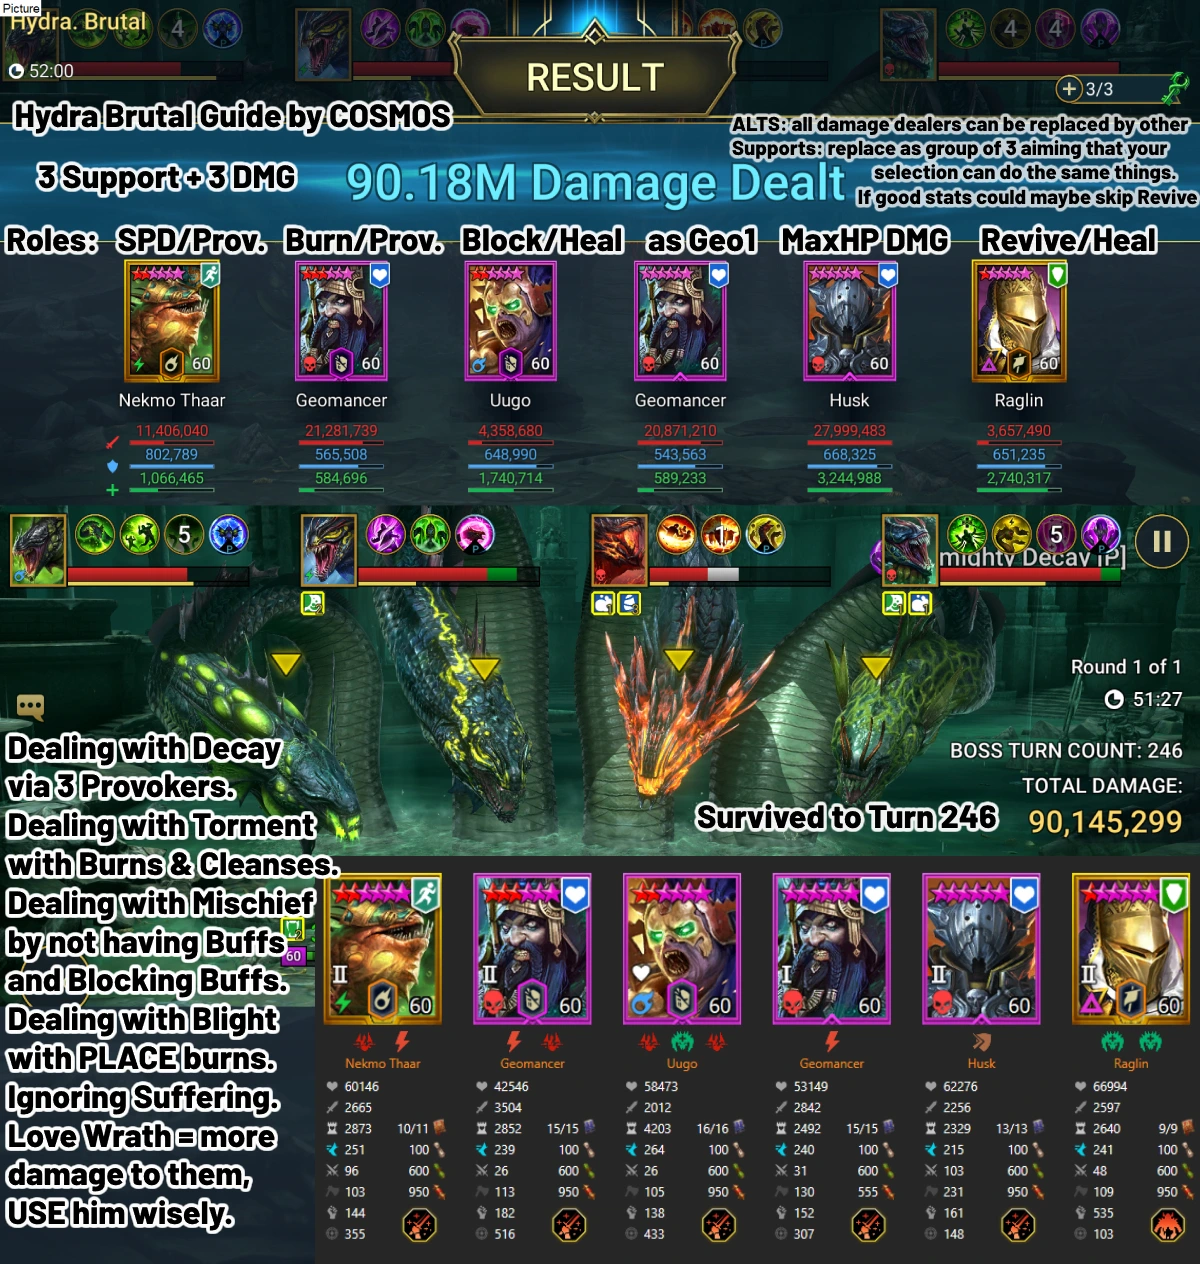 90M Hydra Brutal Guide by COSMOS 3 Support 3 DMG - RAID guide